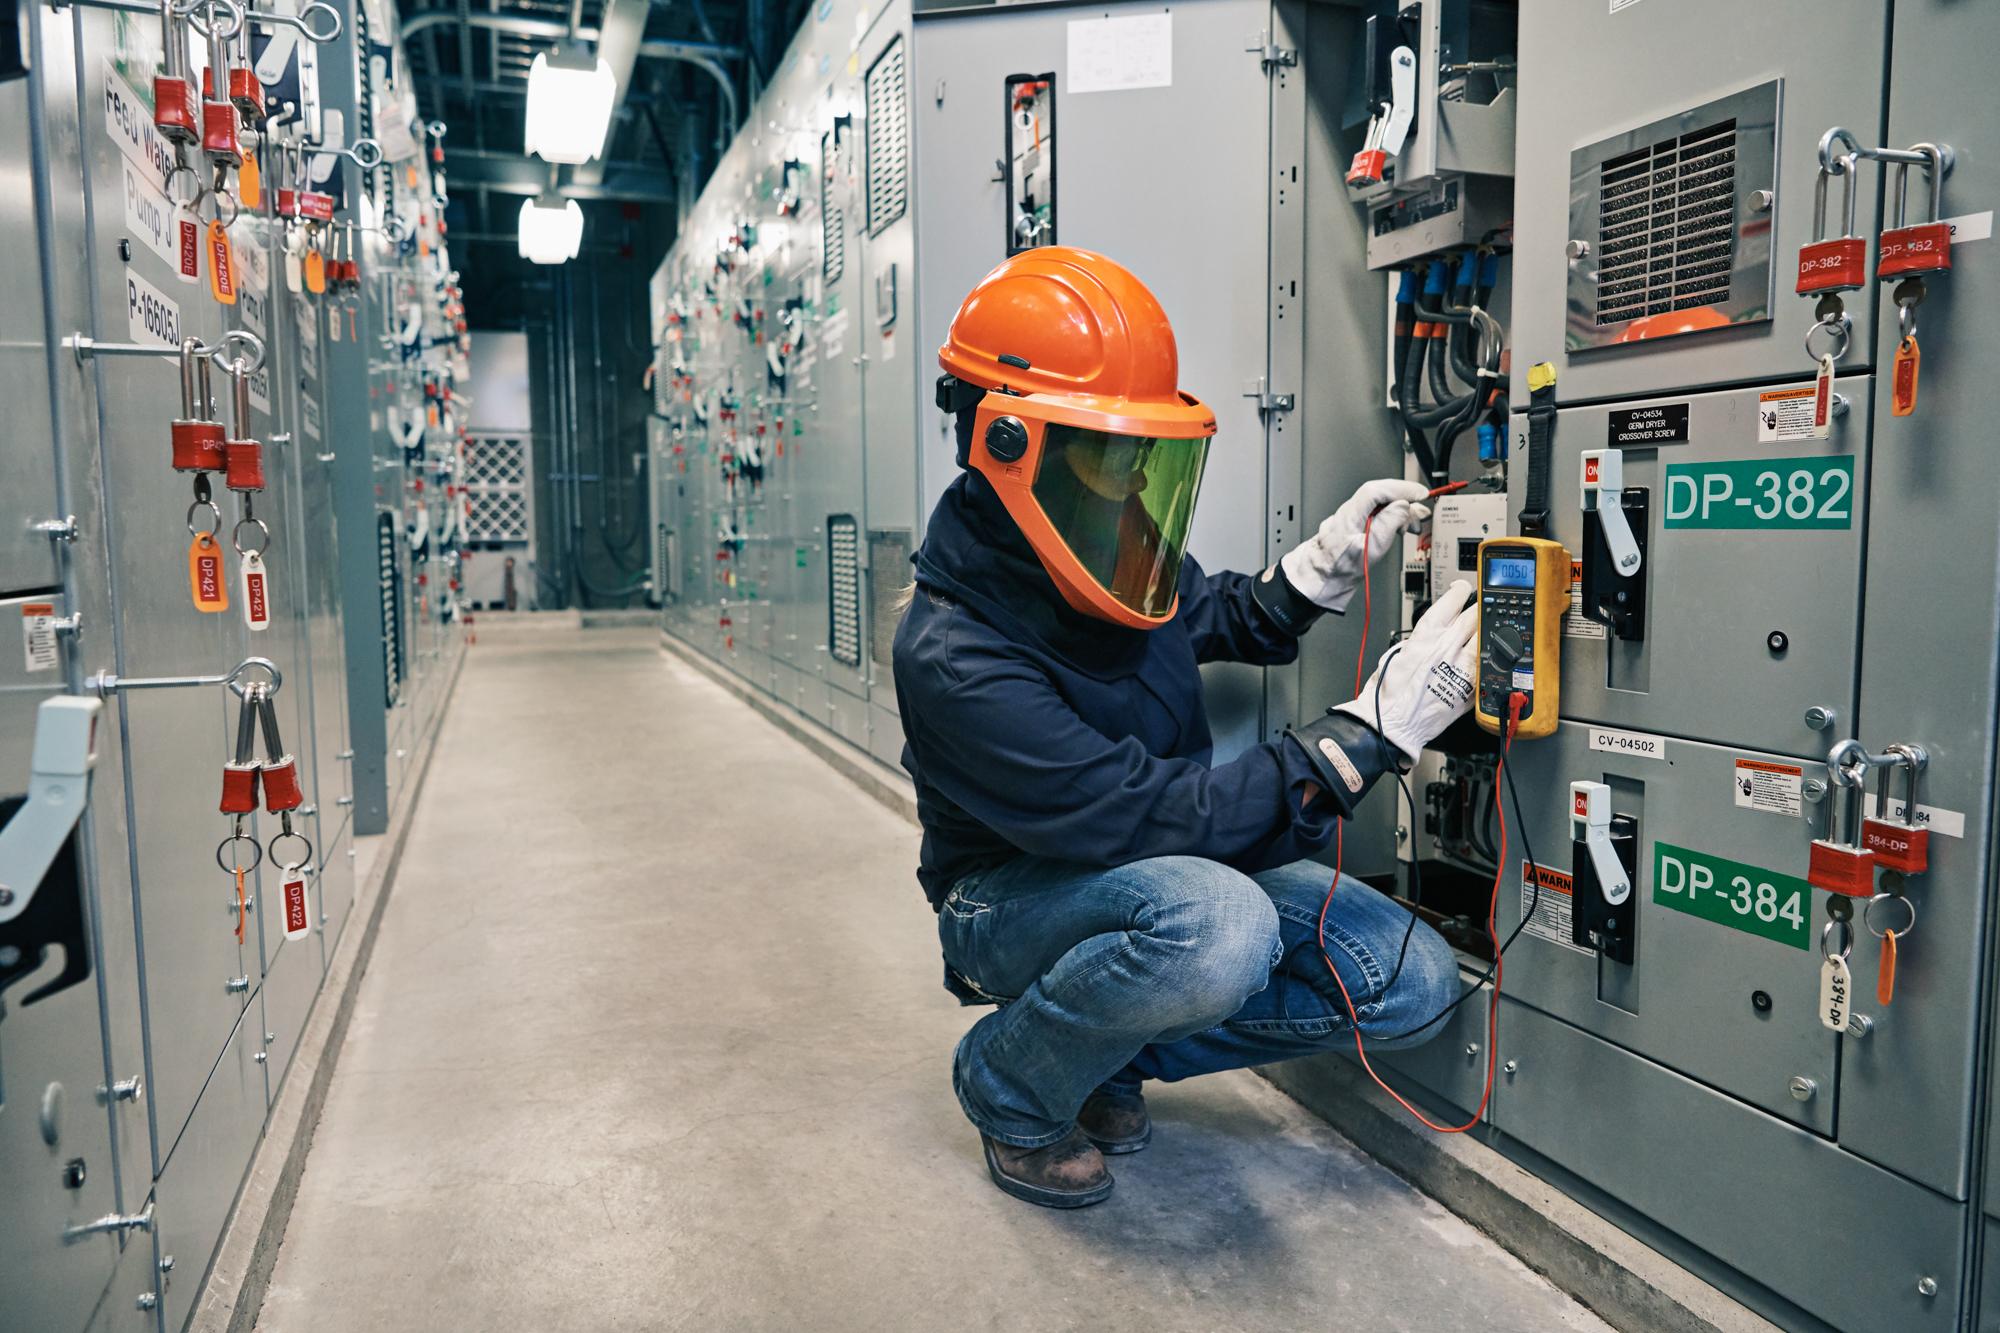 A worker wearing an orange safety helmet is working on an electrical panel.